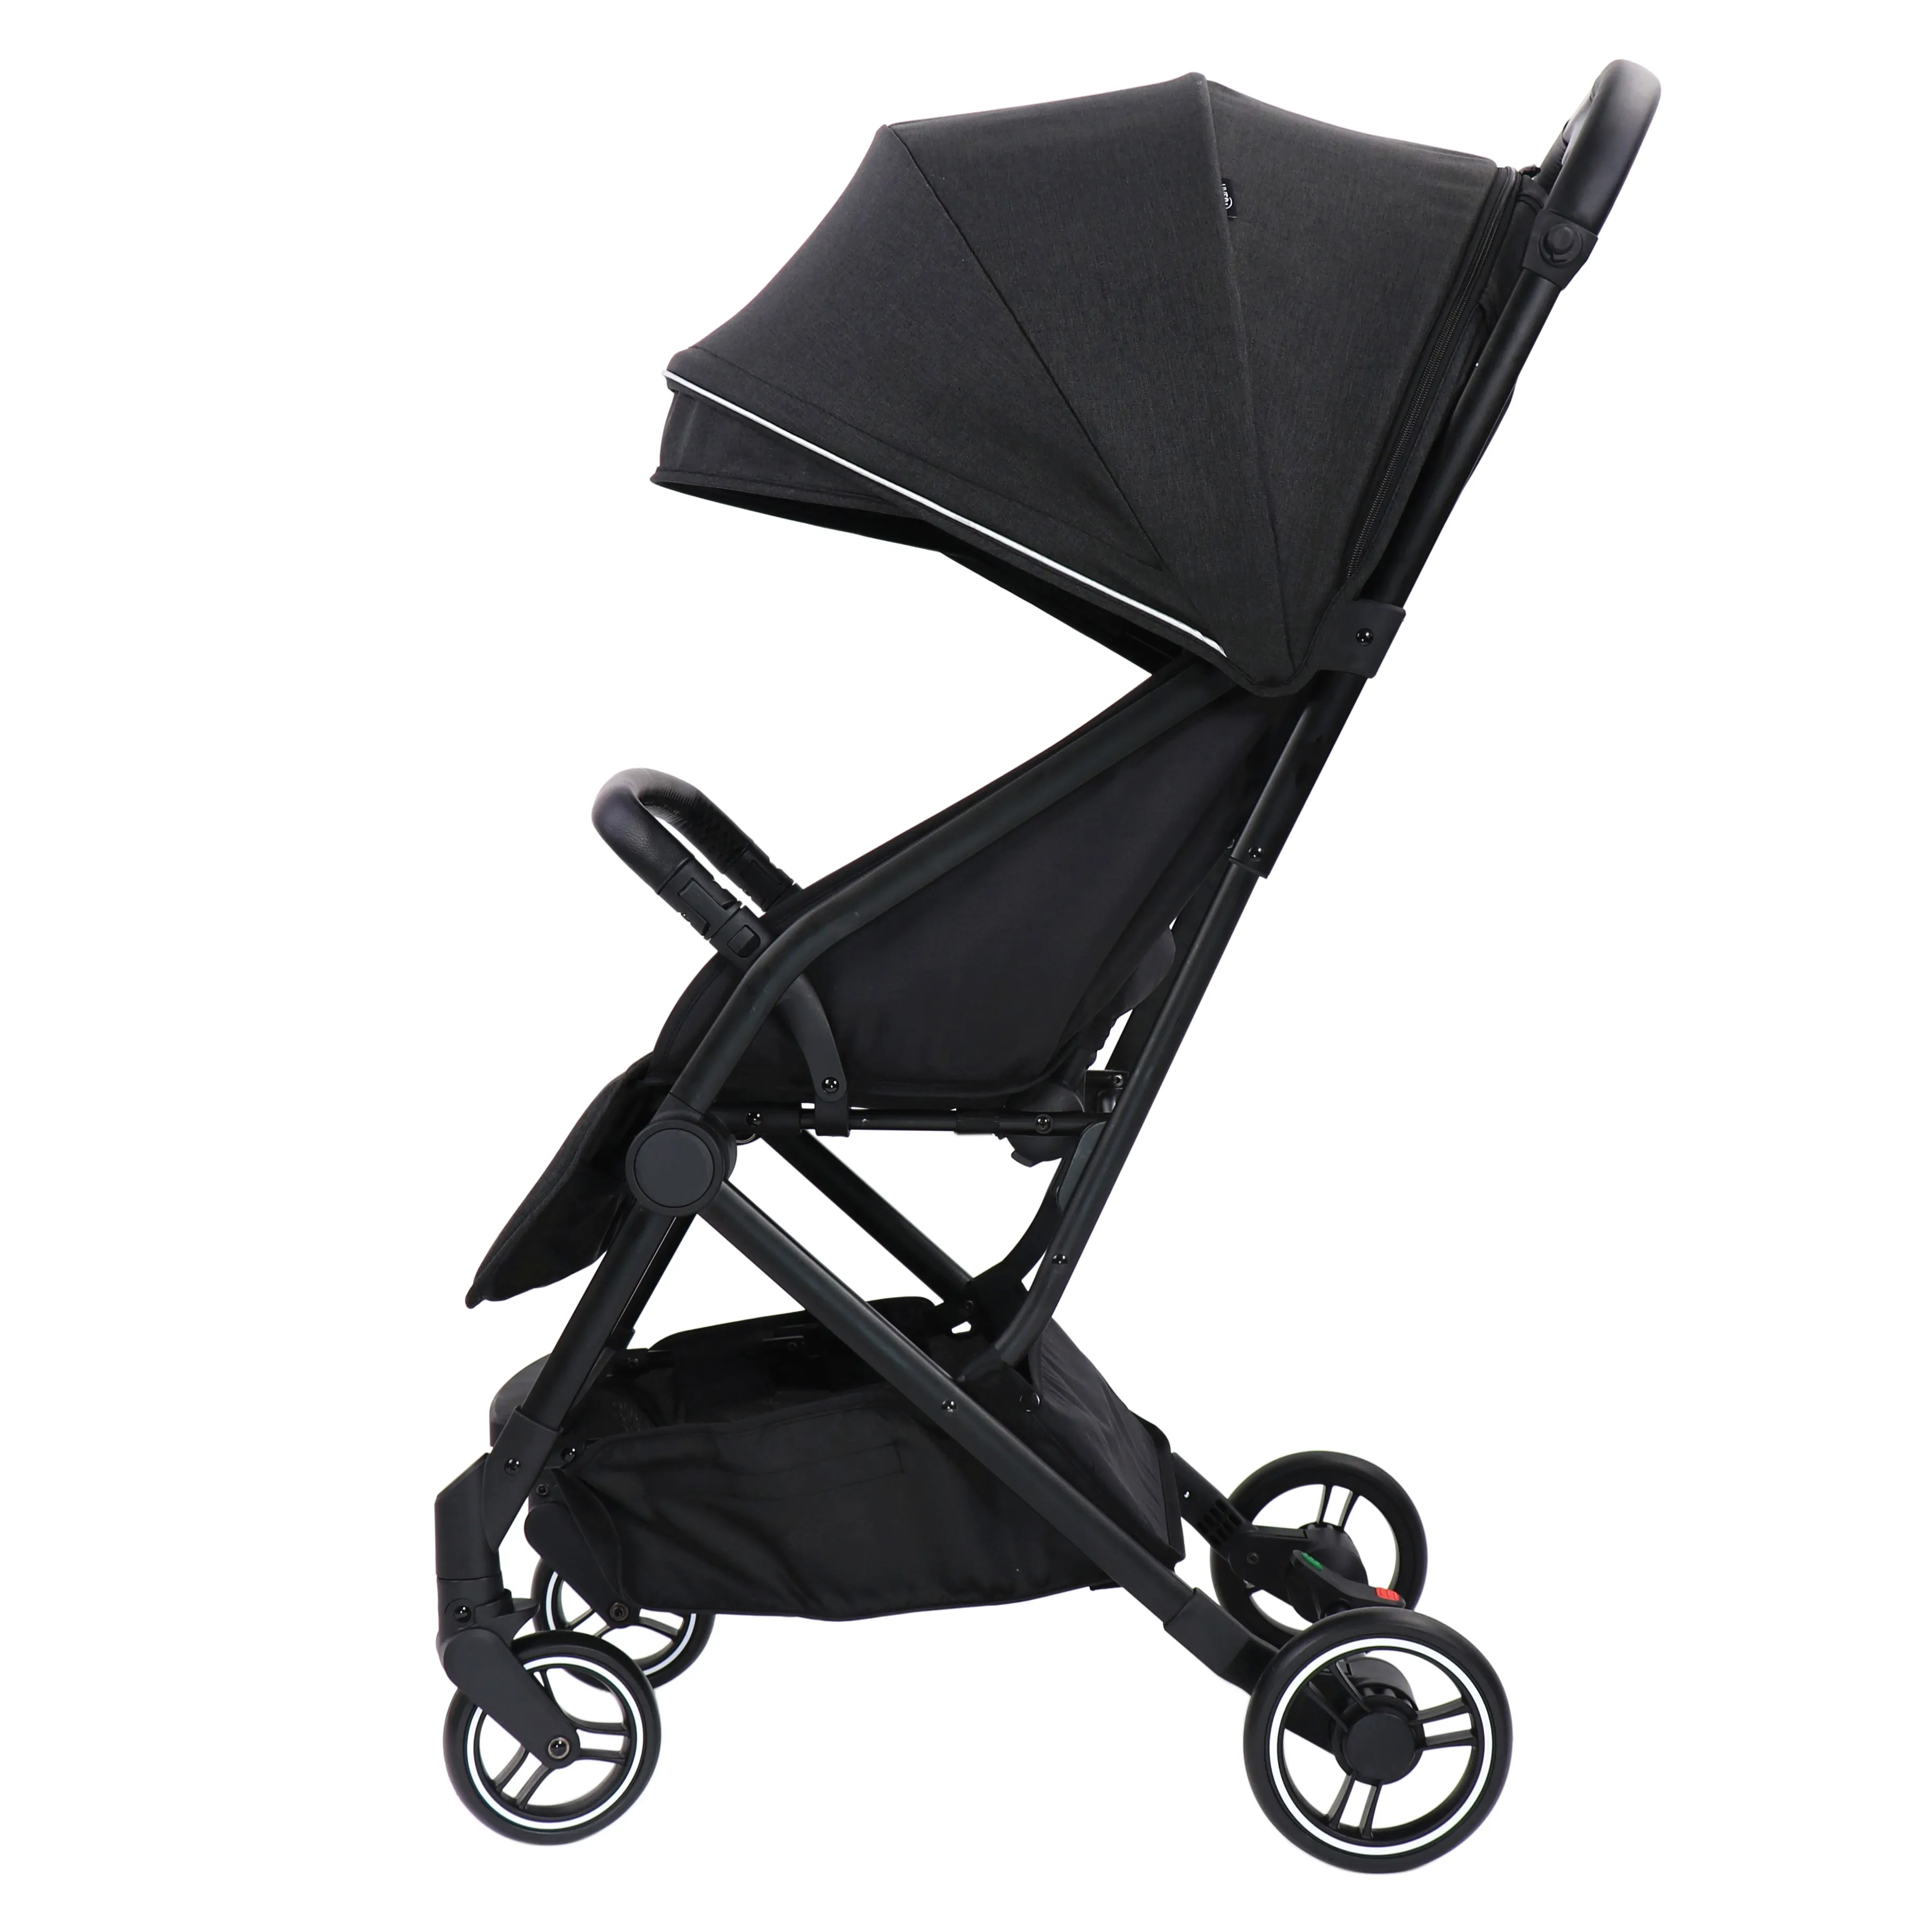 easy to carry cabin approved pushchair for new born baby pram stroller mini buggy for kids foldable